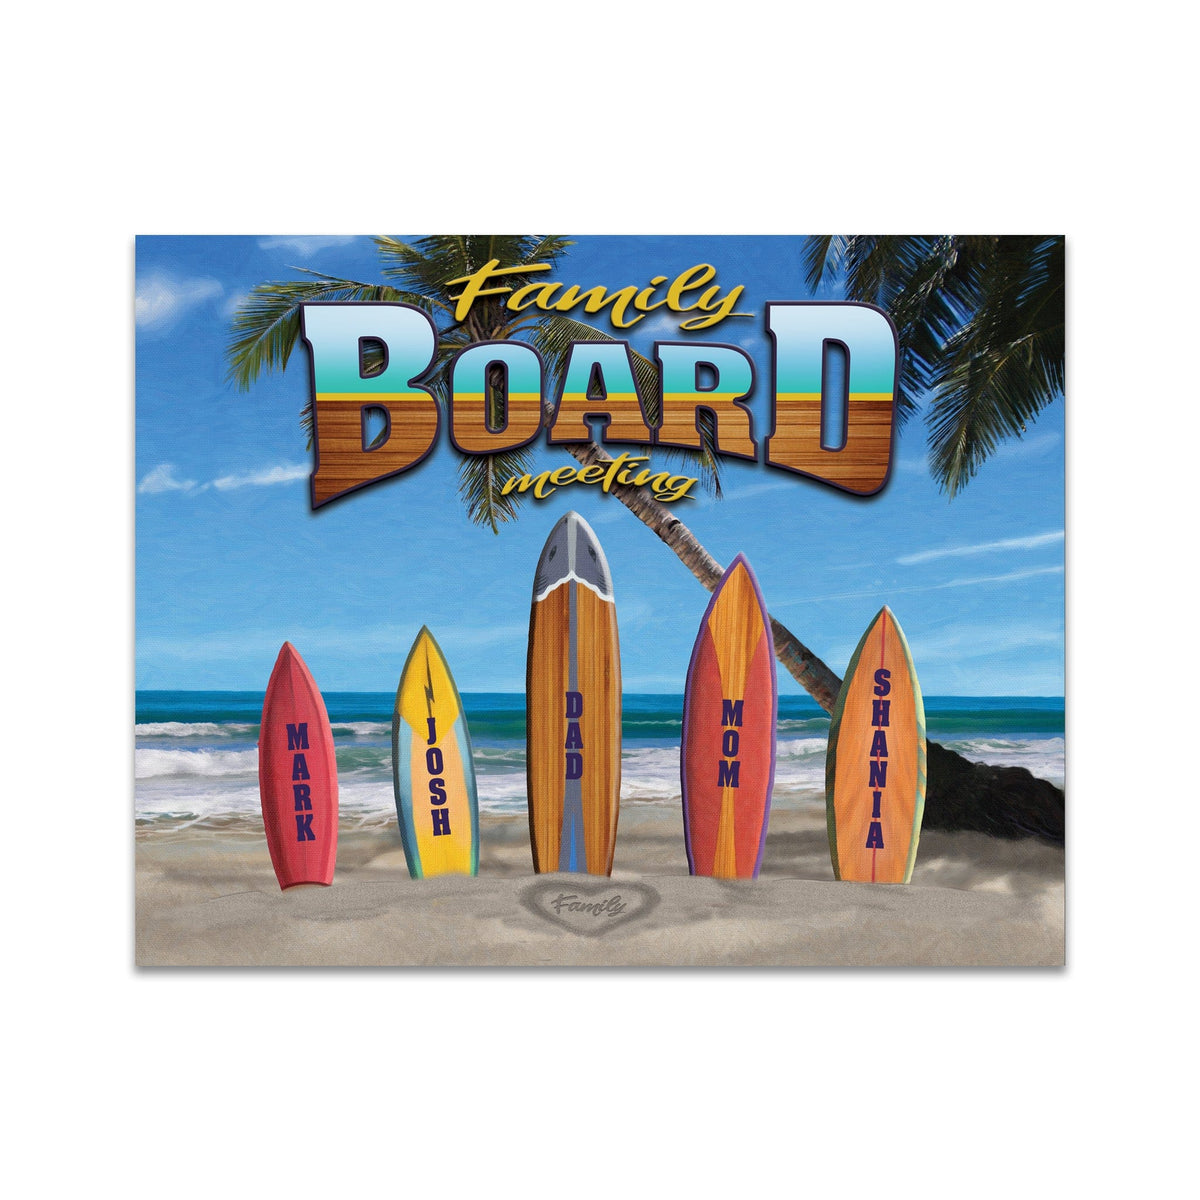 Family Board Meeting | Personalized Beach Surf Sign from Personal Prints